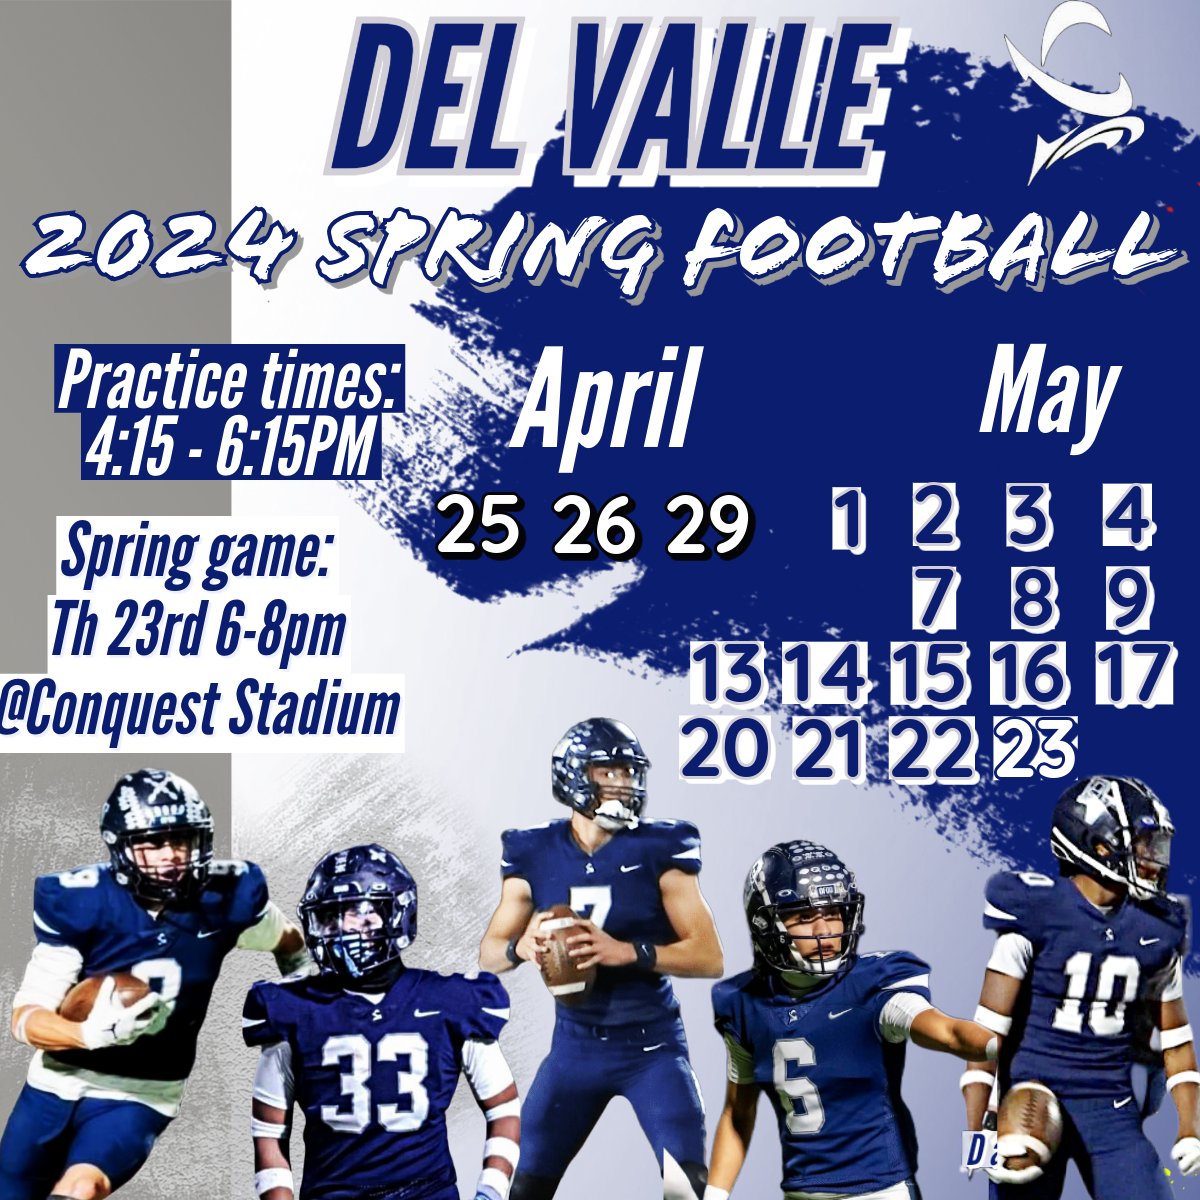 Del Valle Spring football is here!! OFOD! @ContrerasDVOFOD